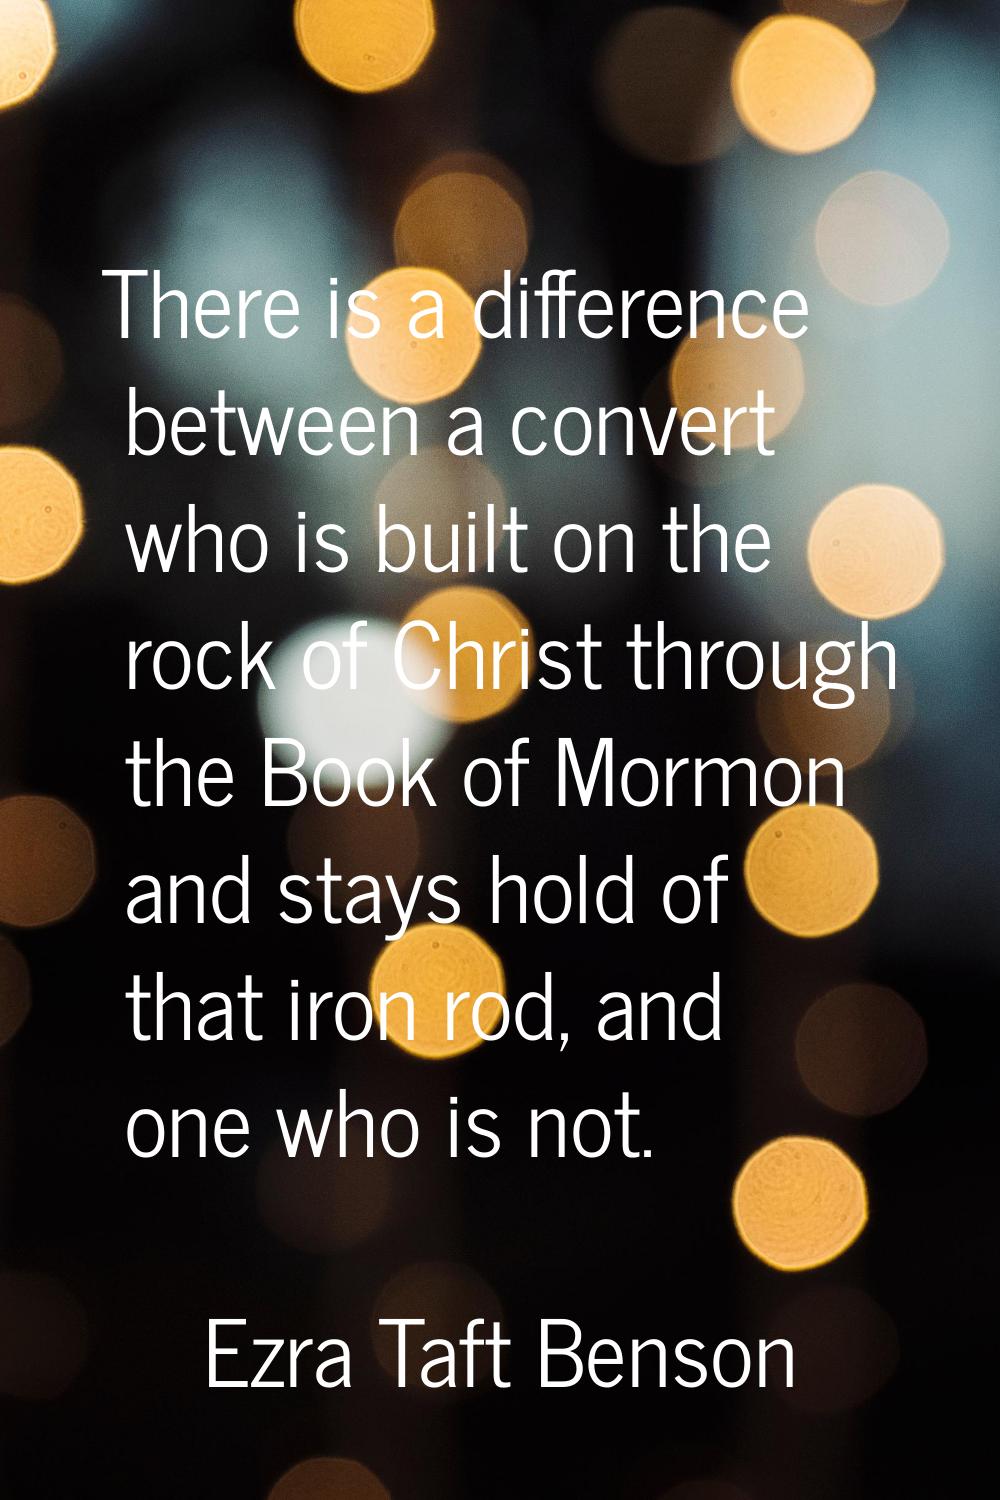 There is a difference between a convert who is built on the rock of Christ through the Book of Morm